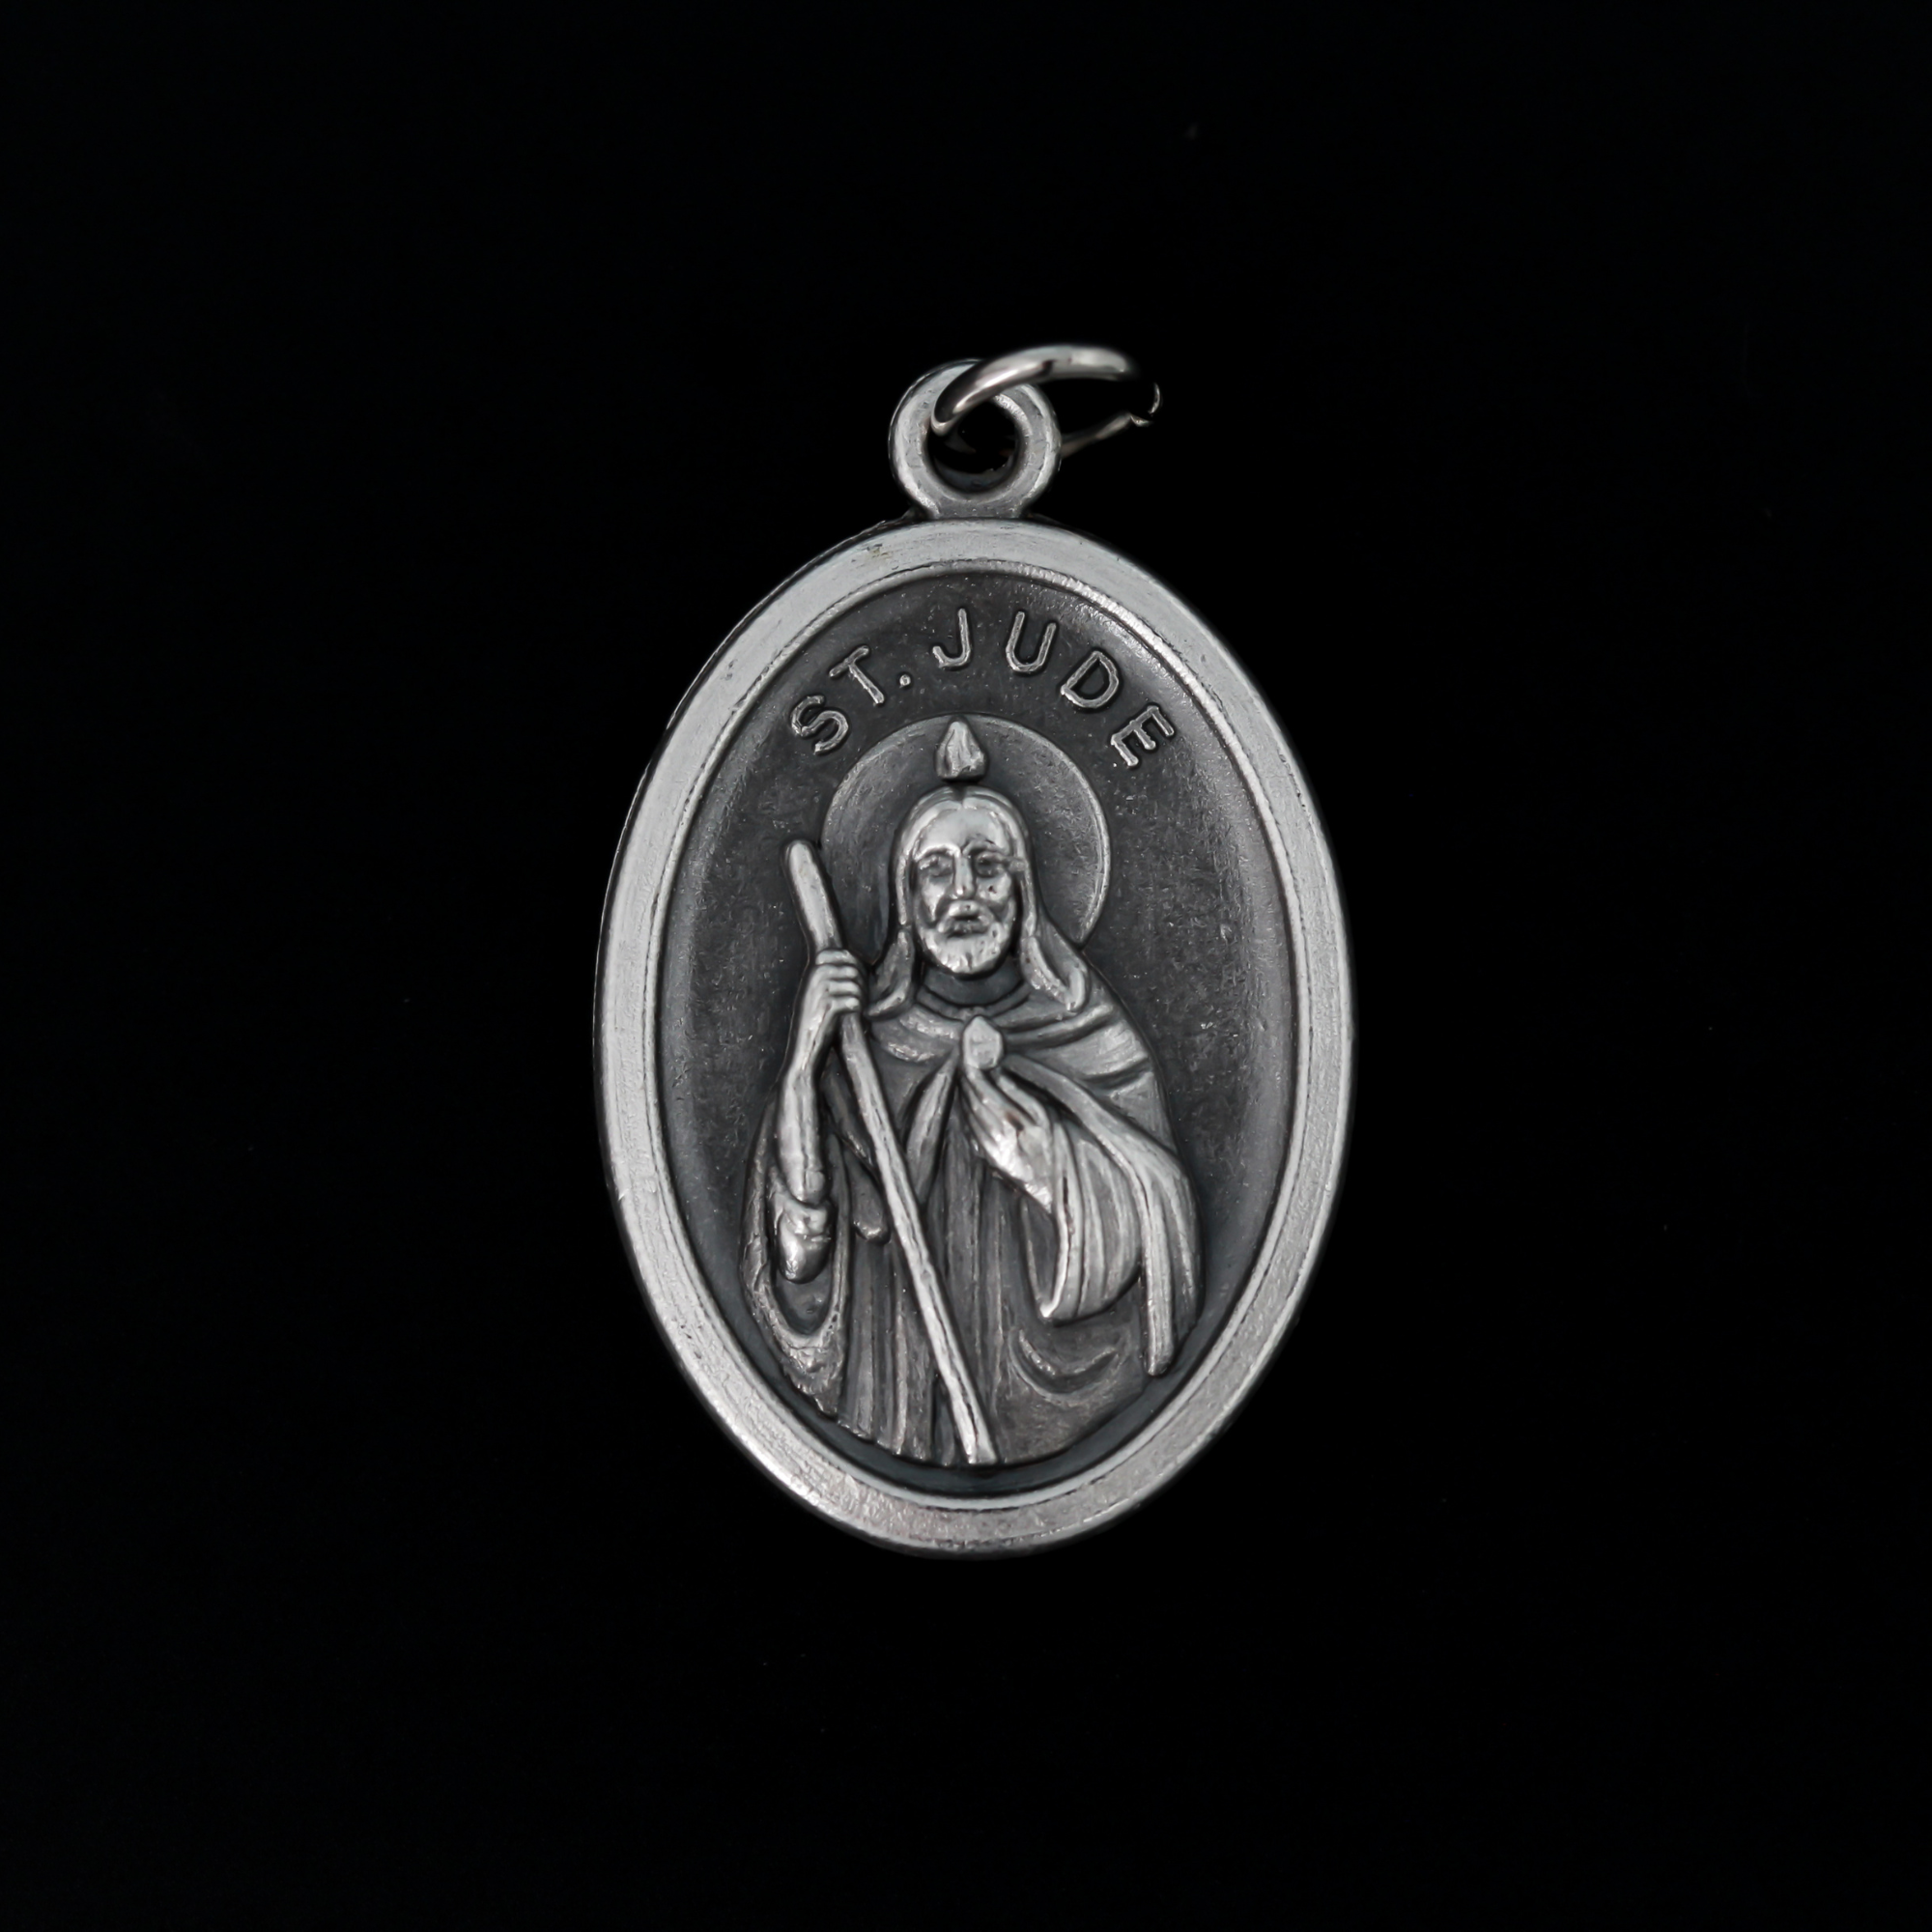 Saint Jude oval medal that depicts the saint on the front and "Pray For Us" on the back